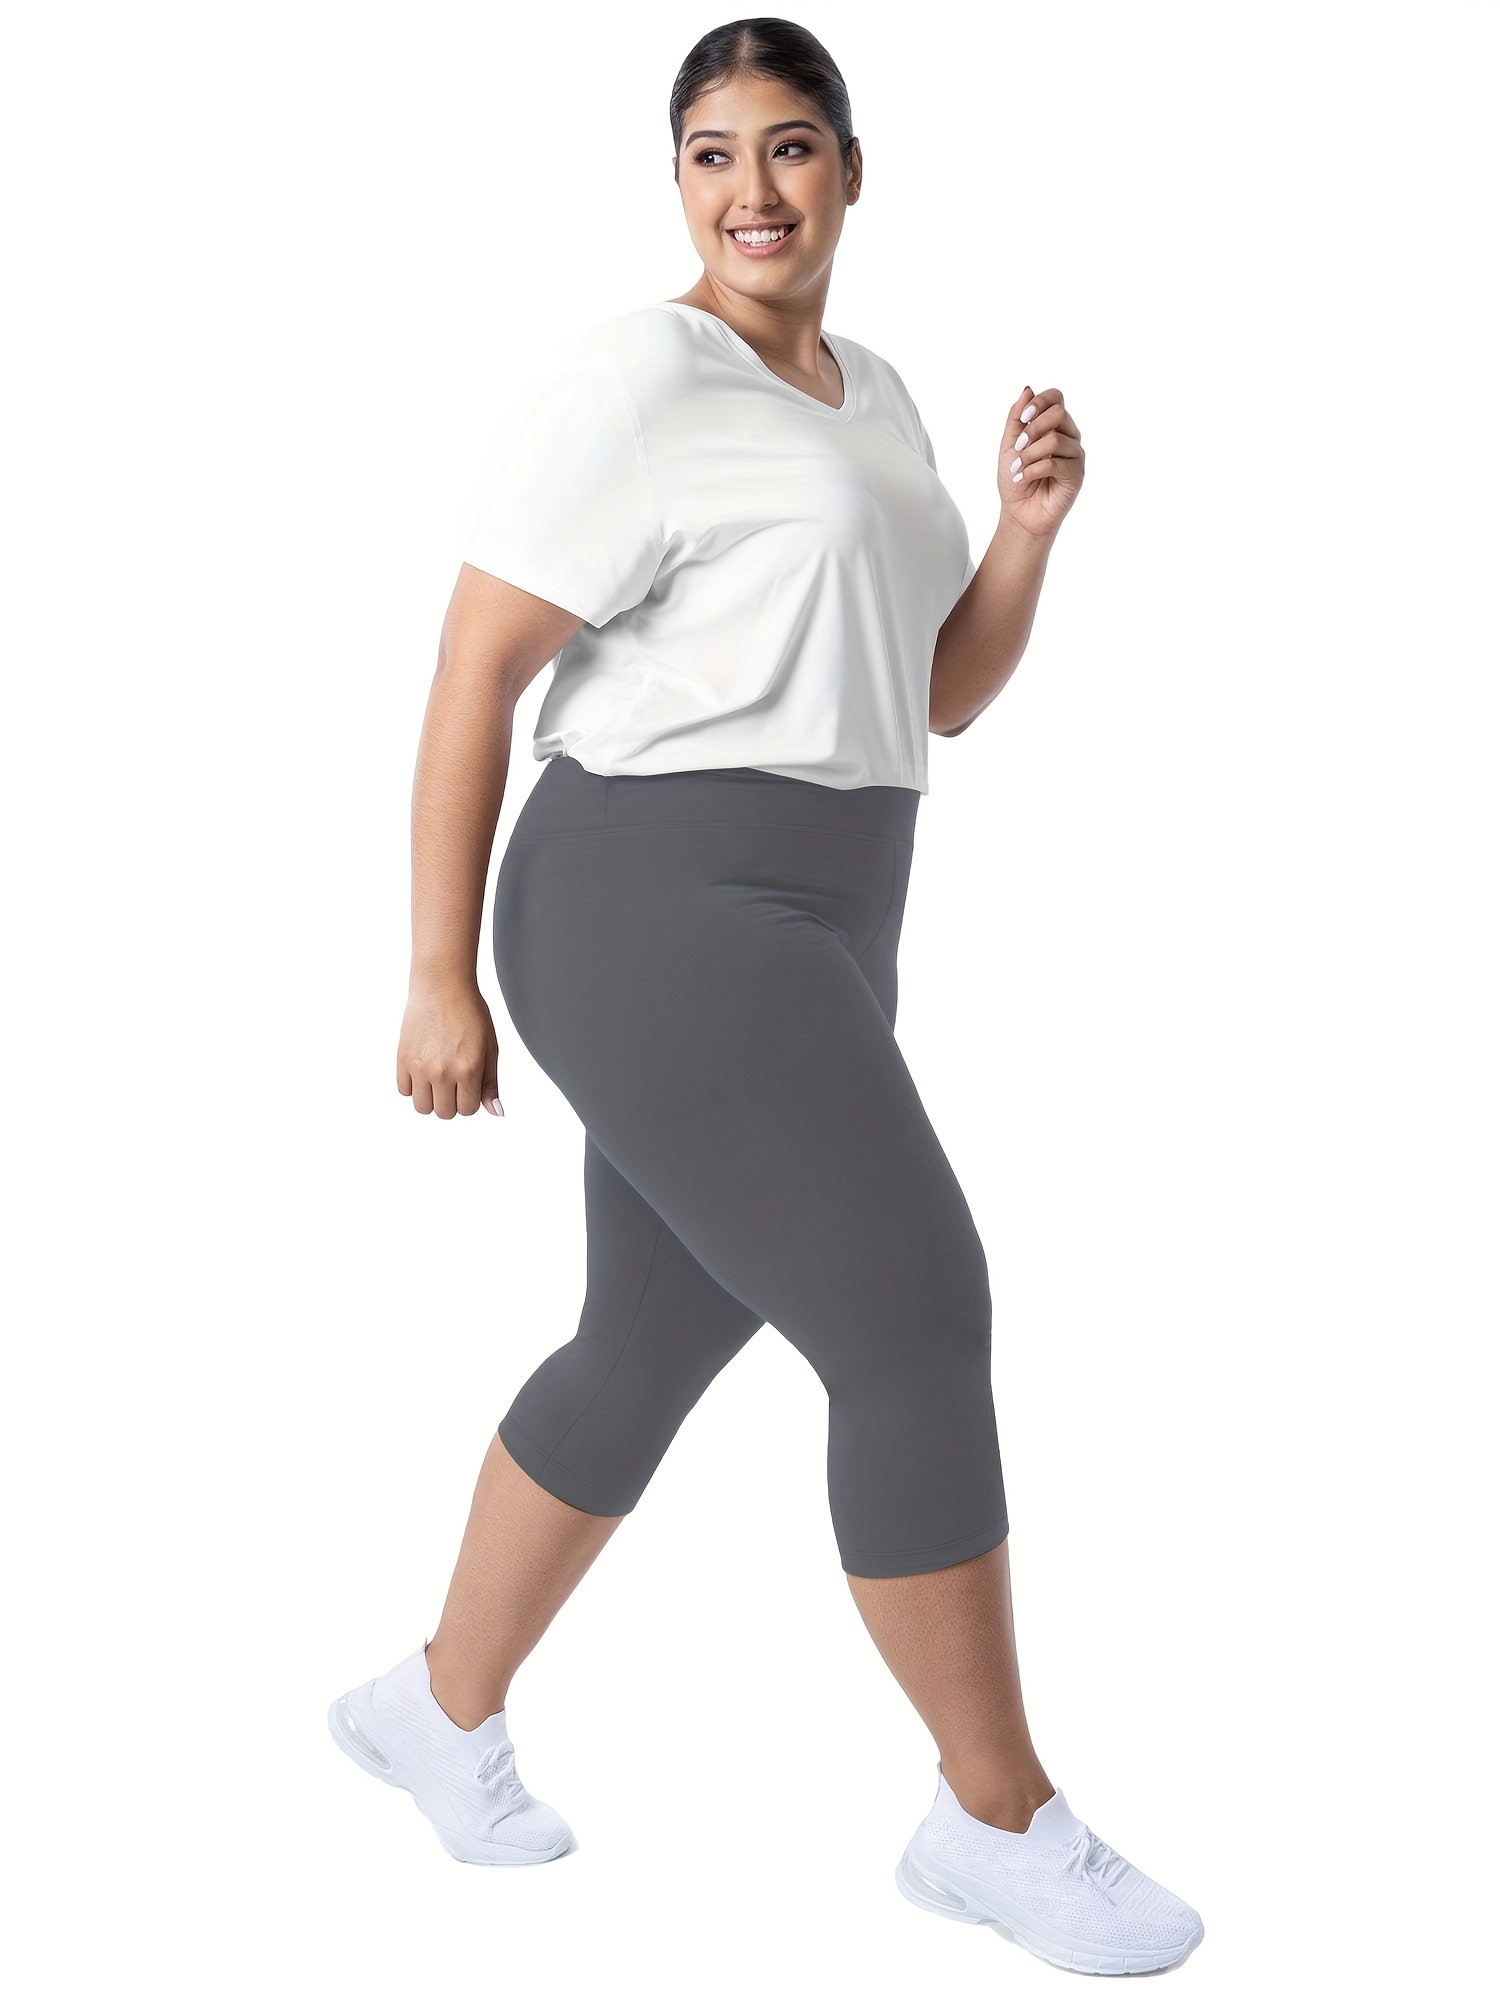 Buttery Smooth Basic Solid High Waisted Extra Plus Size Capris - 3 Inch -  3X-5X